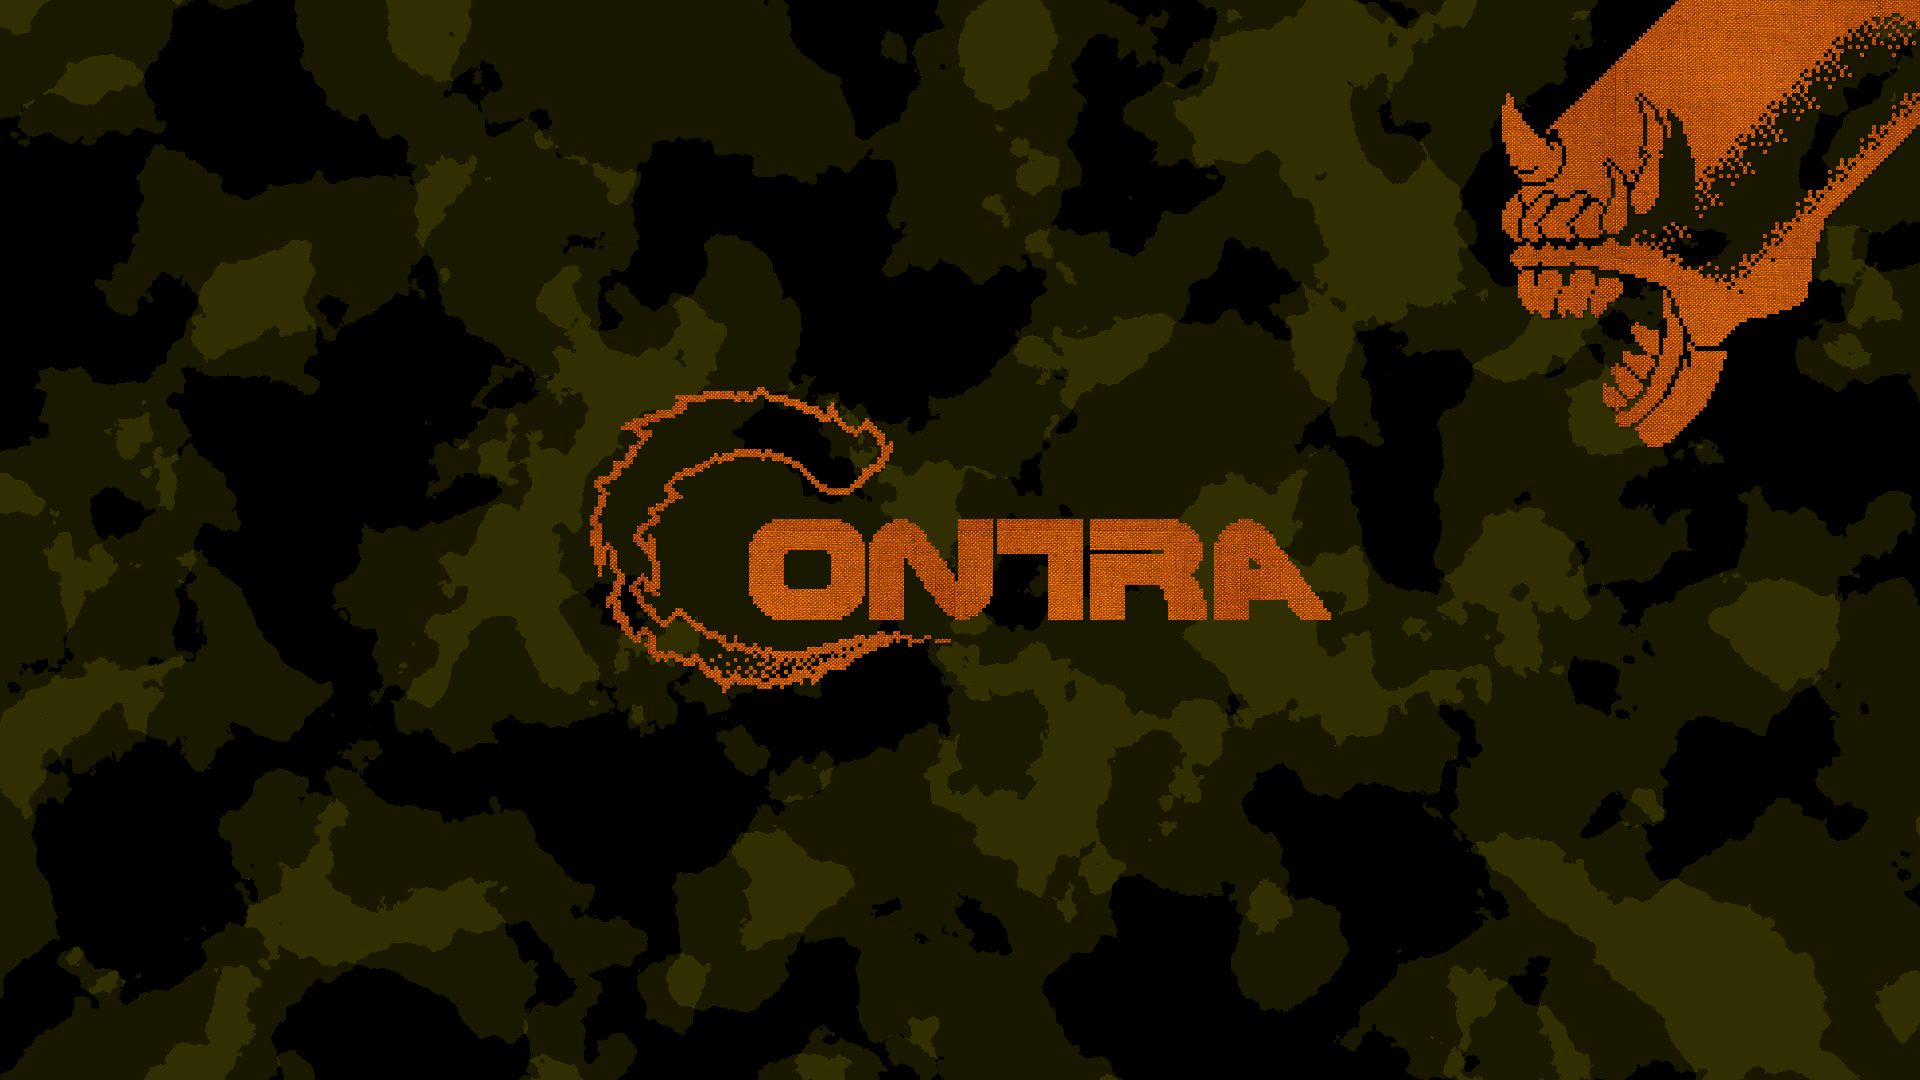 Contra Wallpaper Background